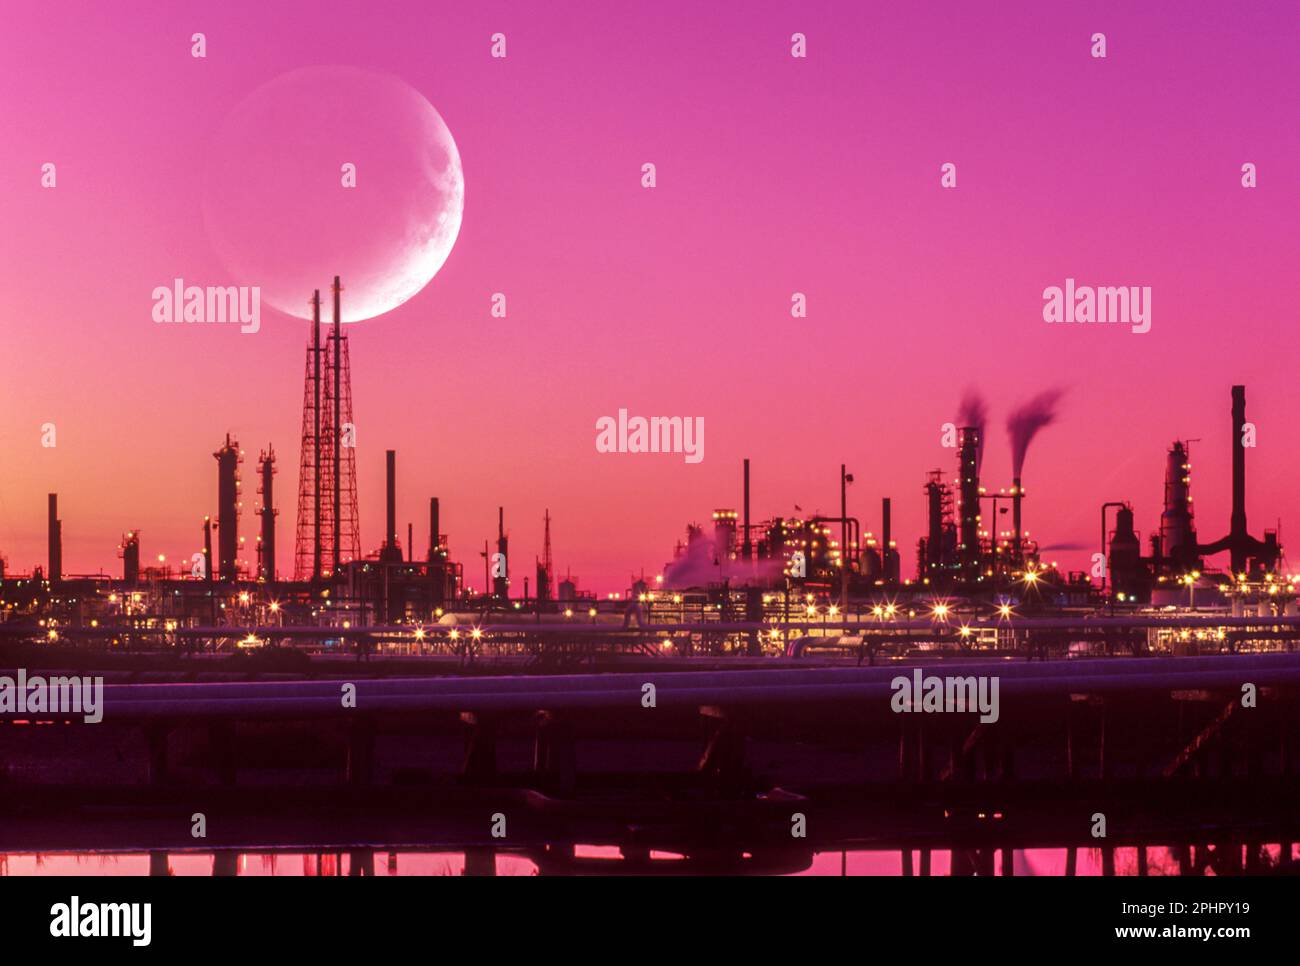 CRACKING TOWERS AND STORAGE TANKS OIL REFINERY Stock Photo